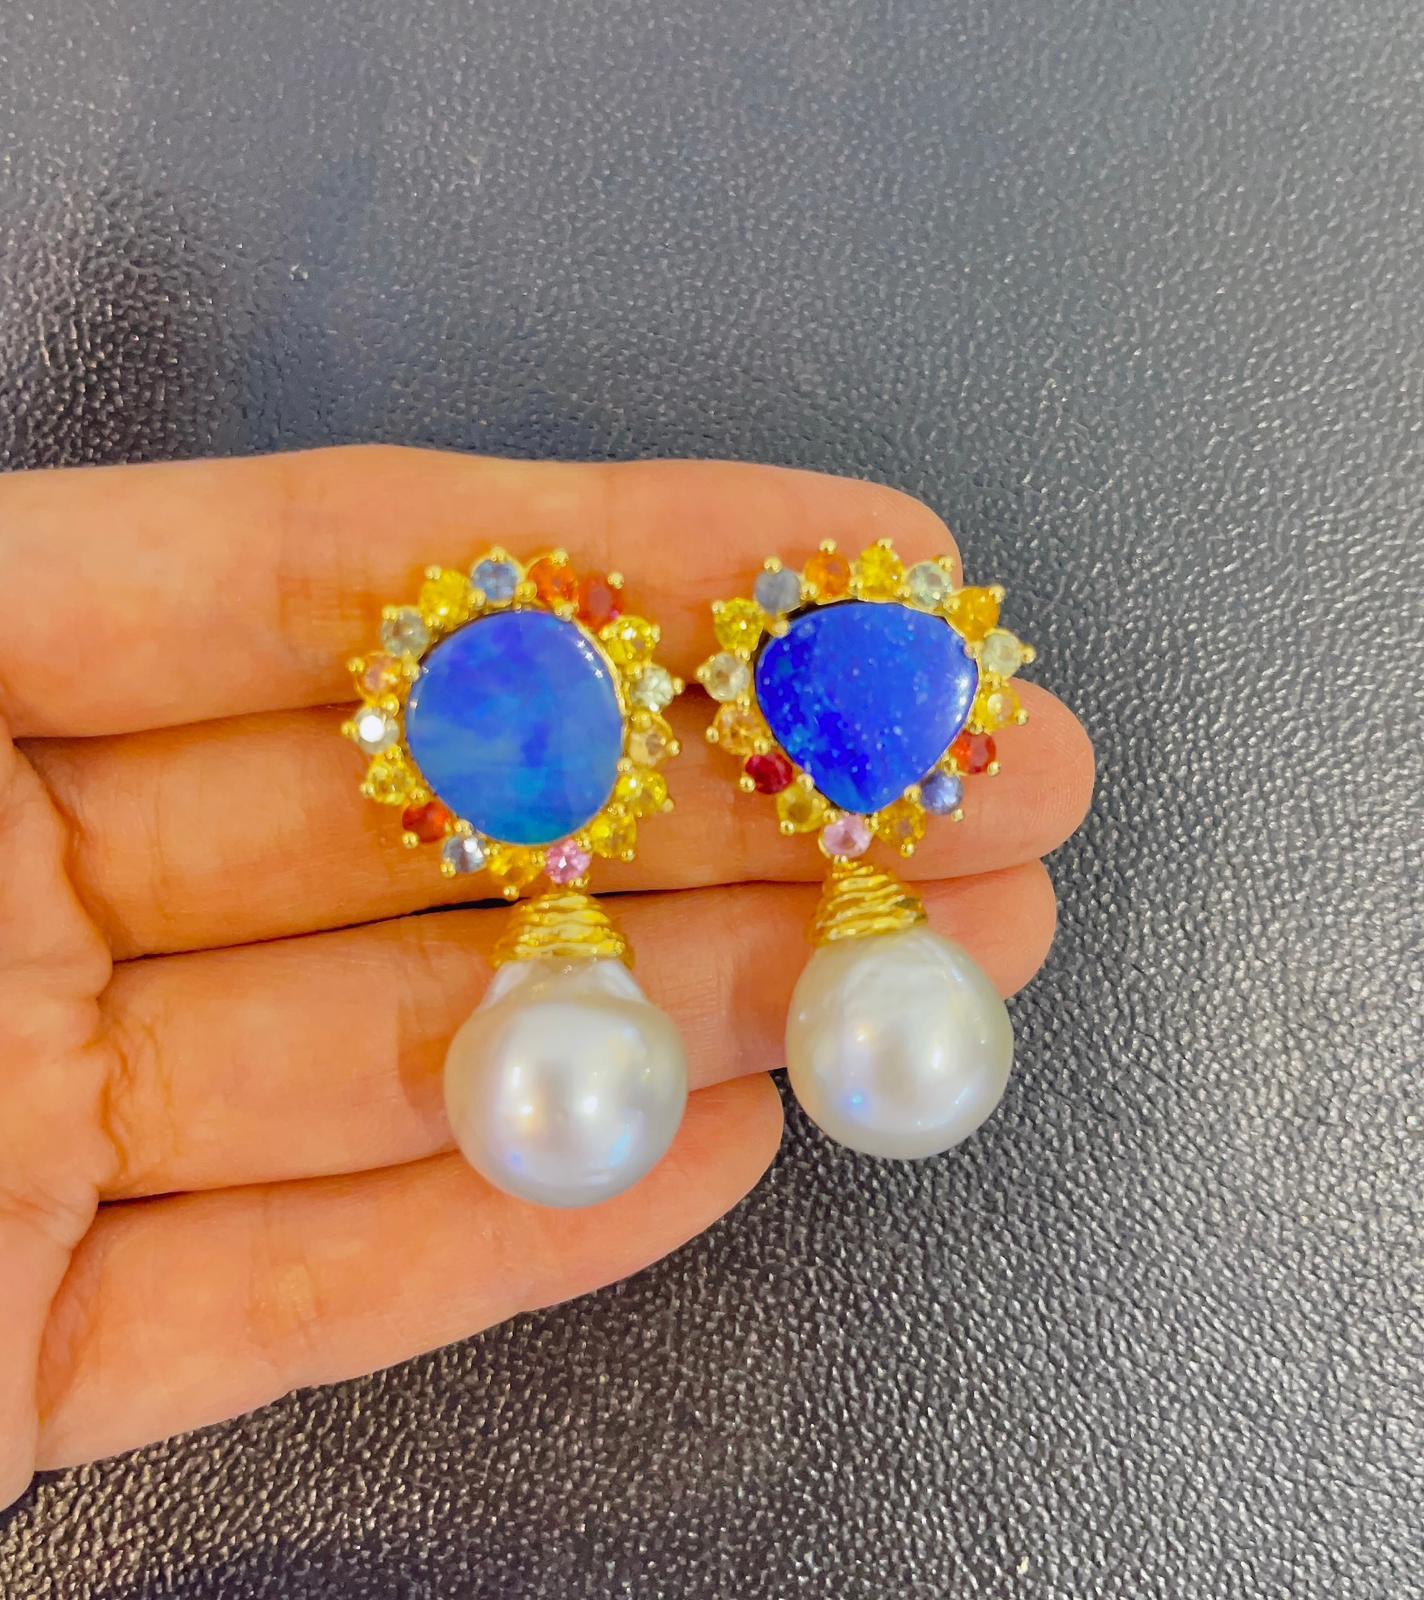 Bochic “Capri” Blue Fire Opal, Sapphire & South Sea Pear Earrings Set In 22K & Silver
From the “Capri” collection 
Natural Opals - 10 carats 
Natural shapes 
Natural Fancy color sapphires, round brilliant  - 4.5 carat 
Sri Lankan 
Sapphire colors -